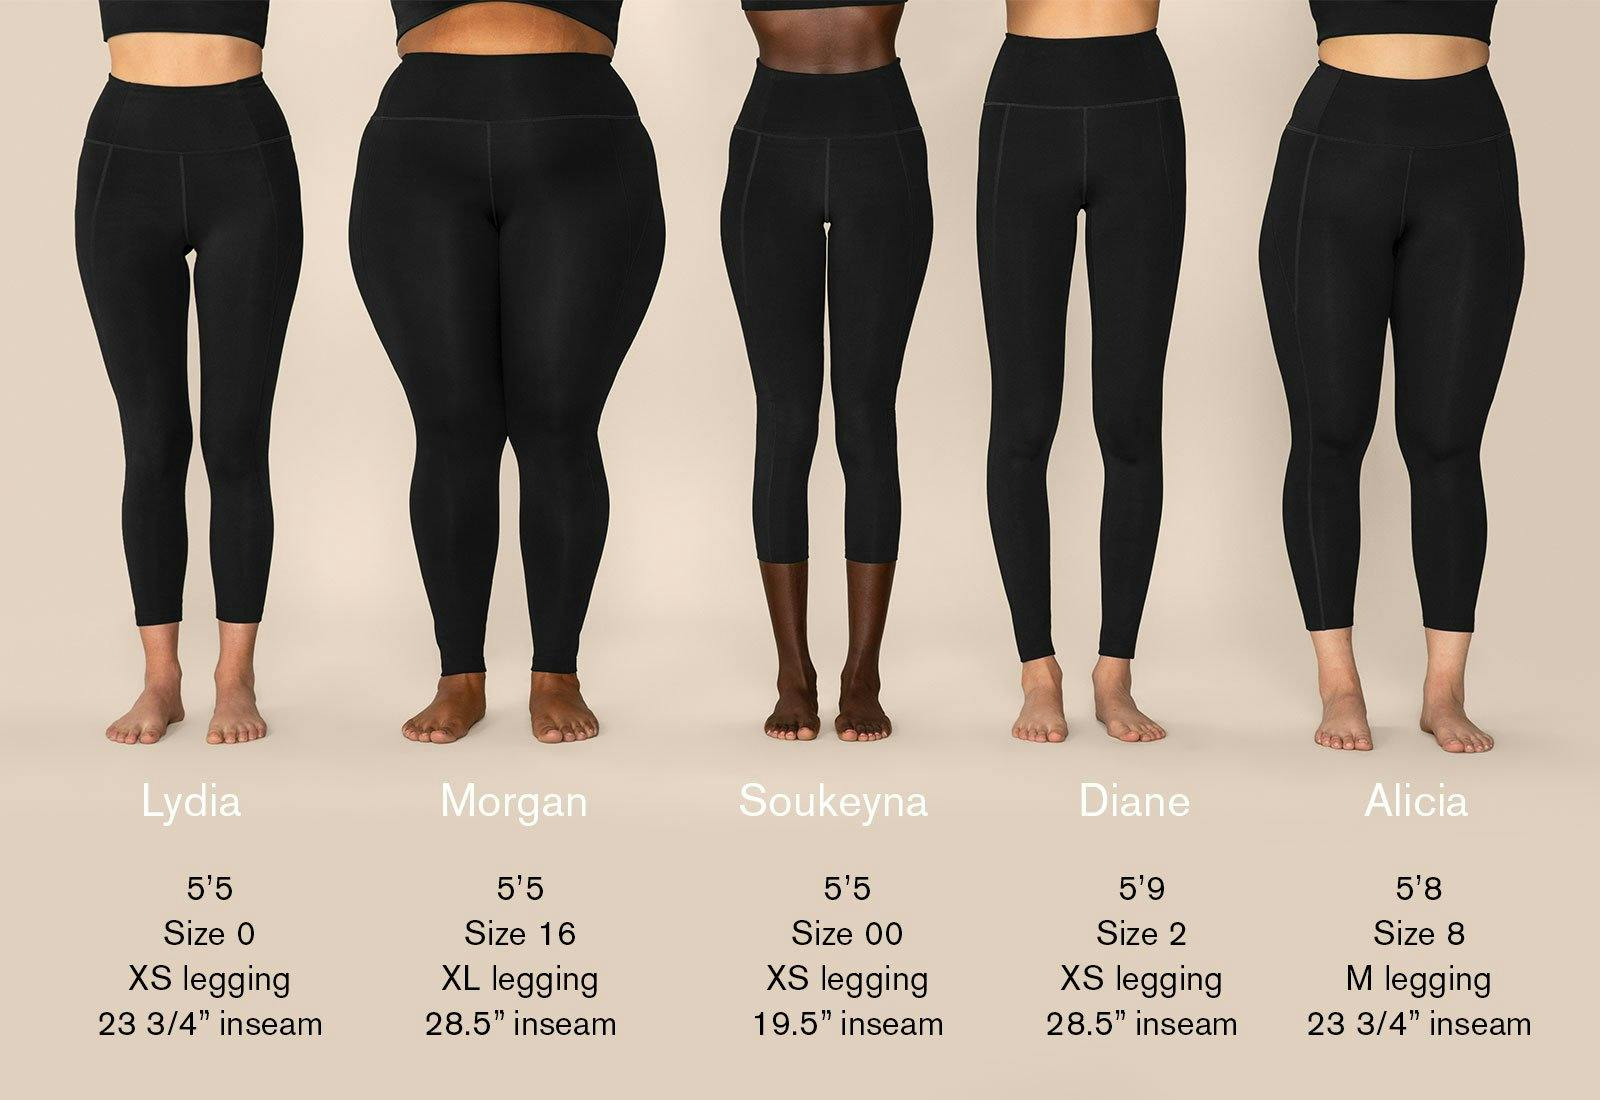 How To Find The Best Leggings: Size Guide